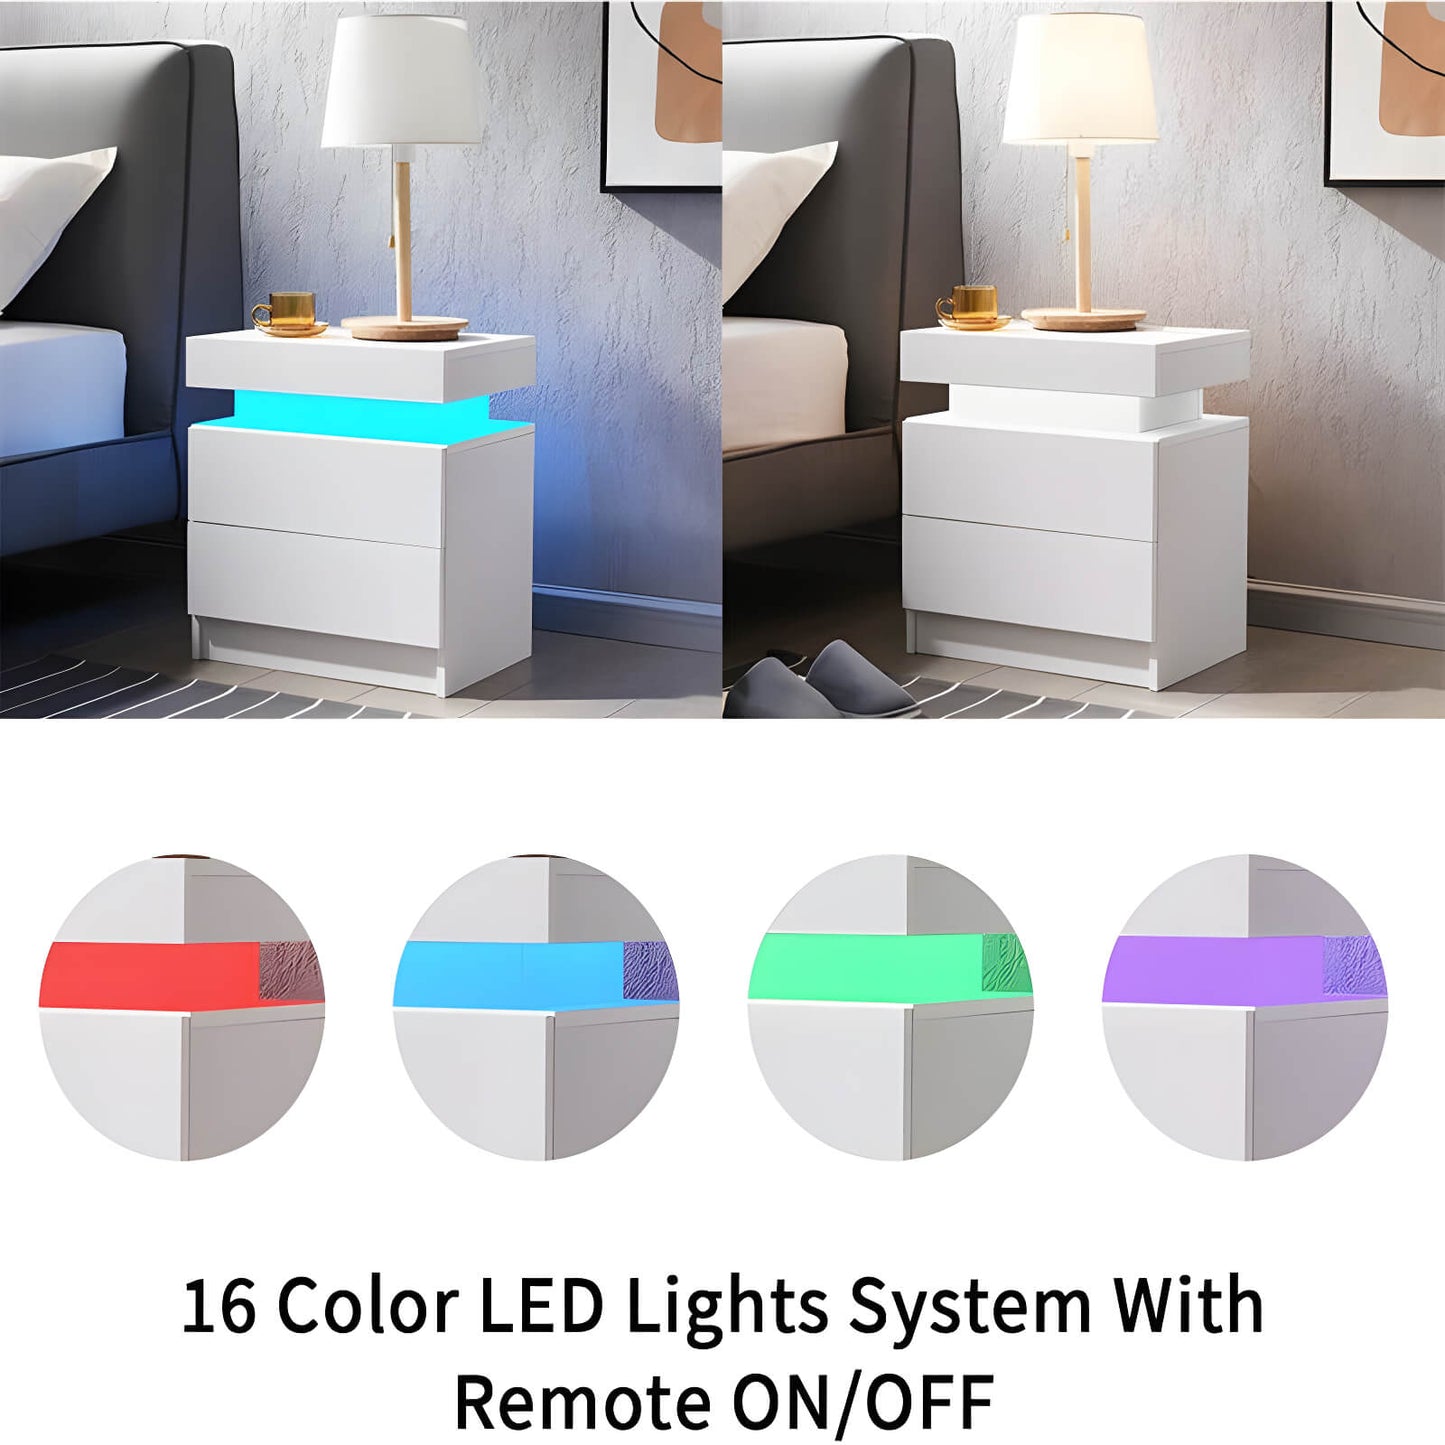 Modern LED Nightstands with Drawer - Set of 2